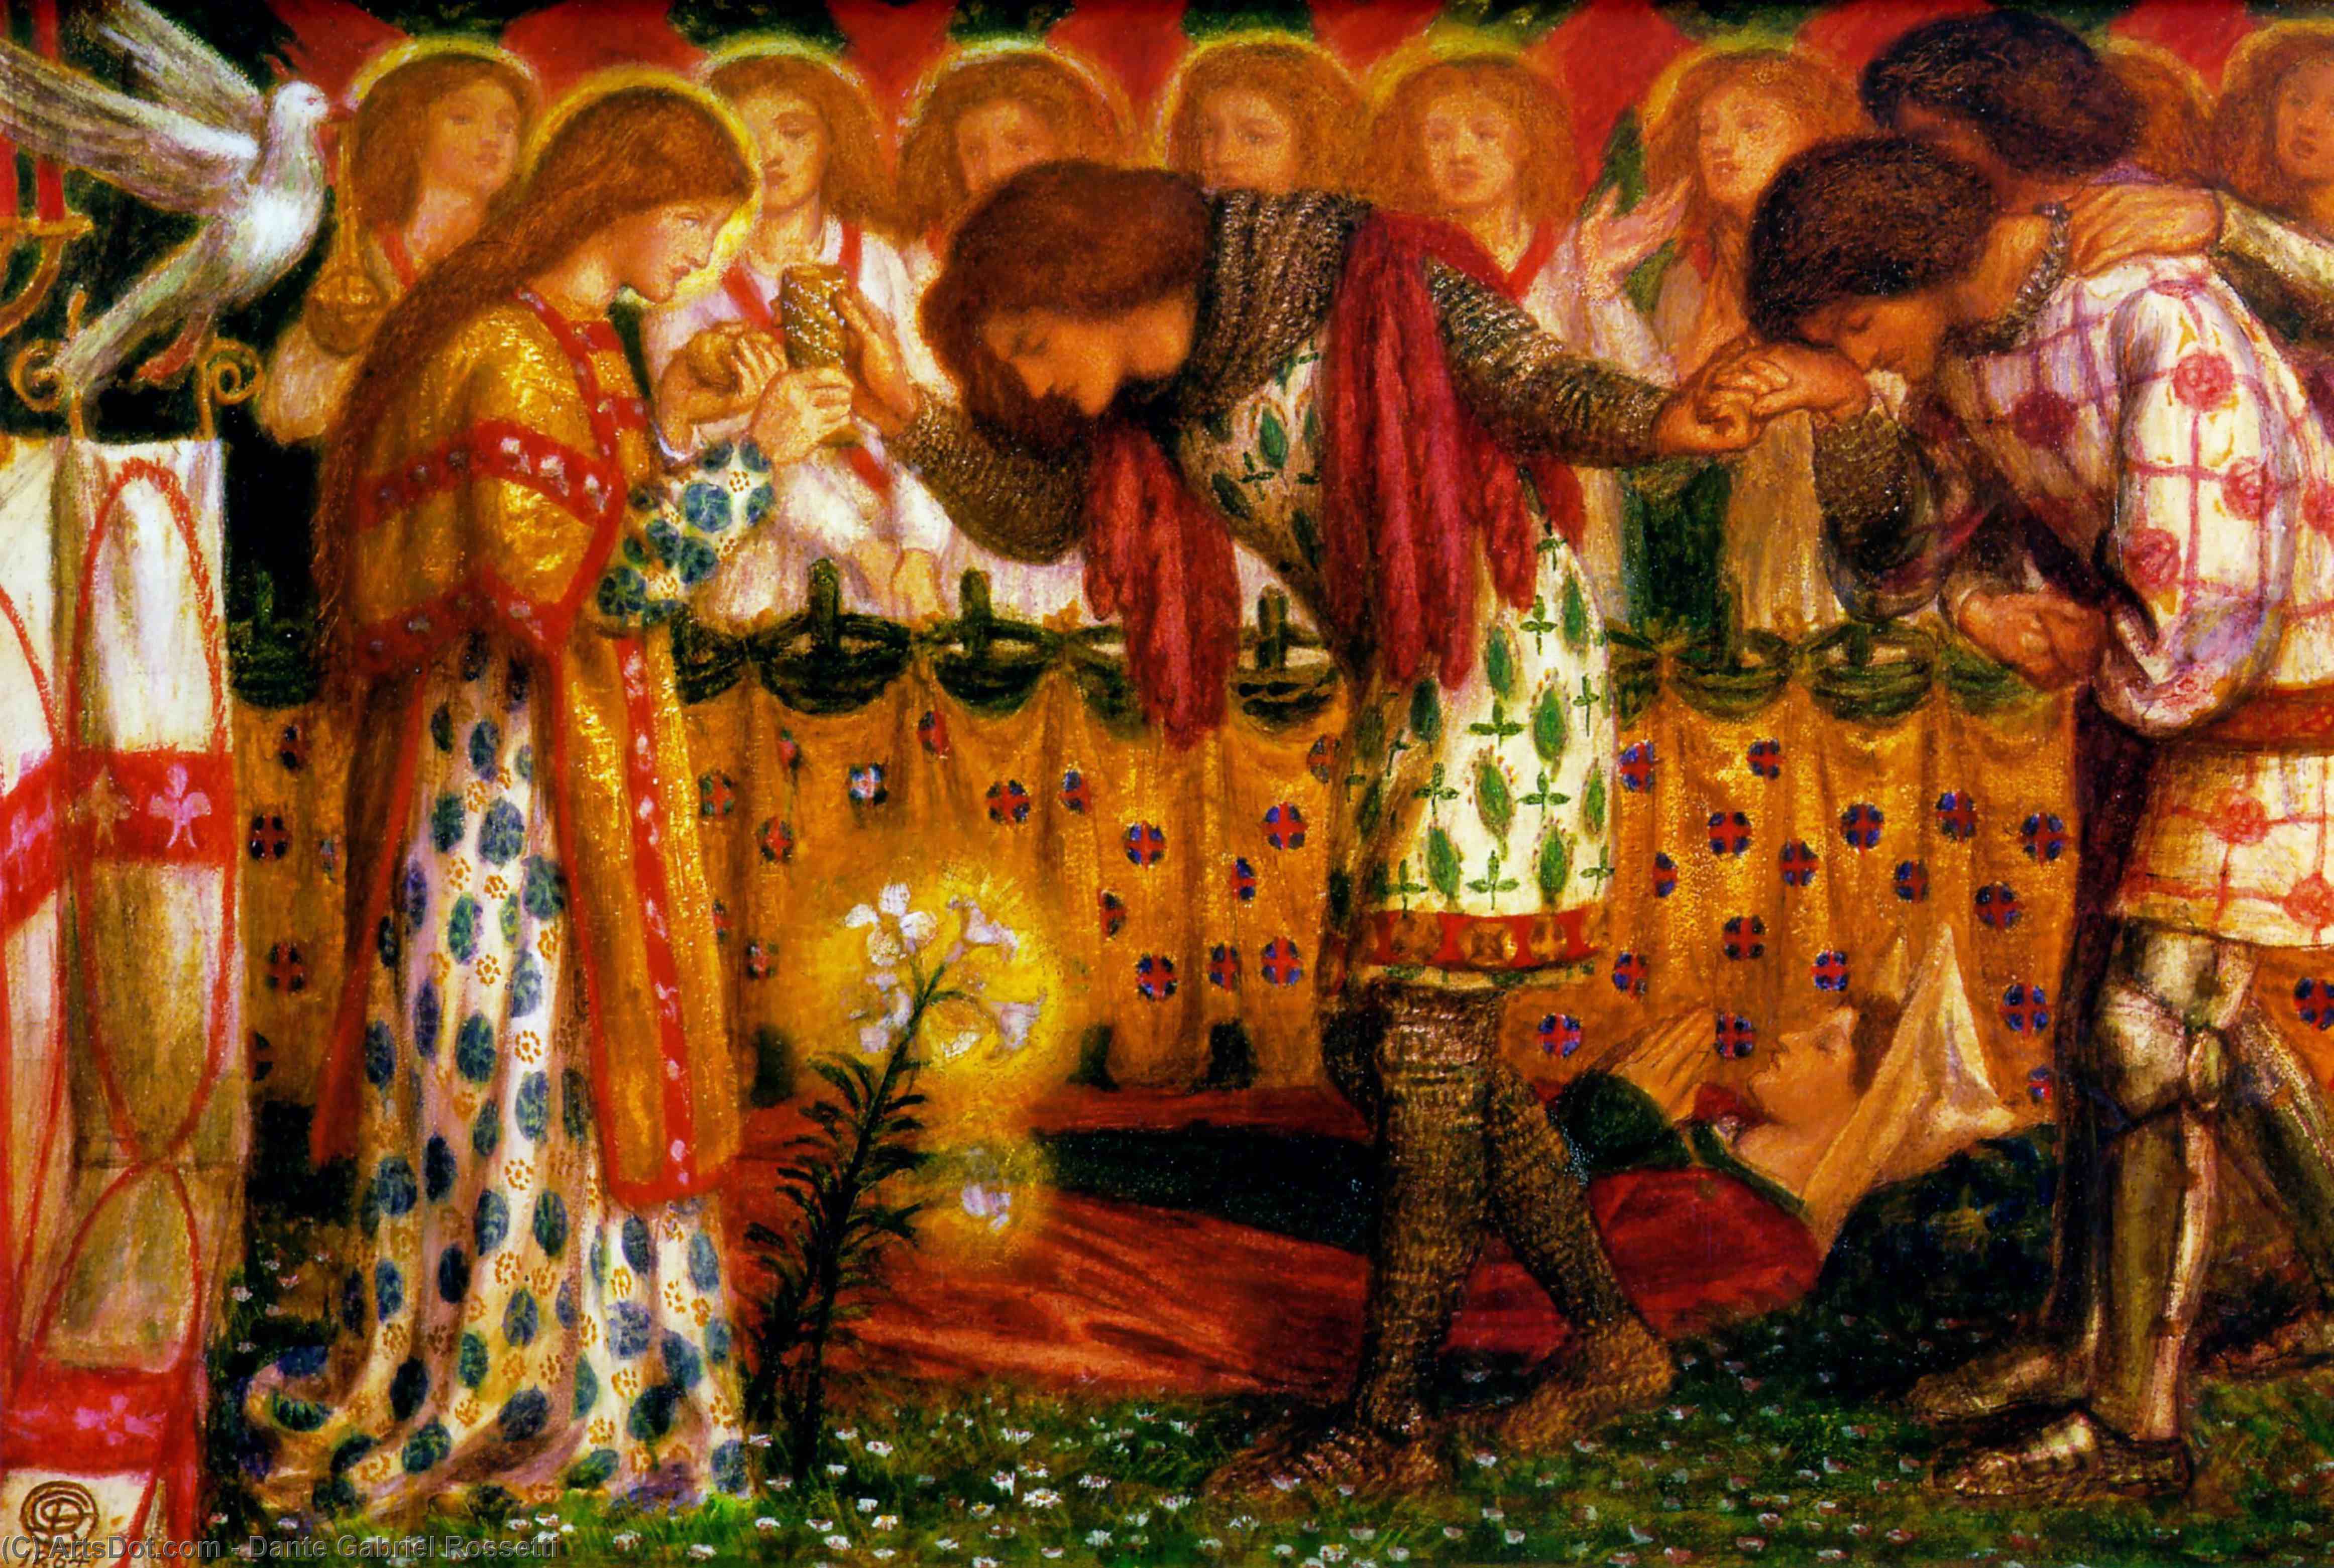 WikiOO.org - Güzel Sanatlar Ansiklopedisi - Resim, Resimler Dante Gabriel Rossetti - How Sir Galahad, Sir Bors and Sir Percival Were Fed with the Sanc Grael; But Sir Percival's Sister Died By the Way